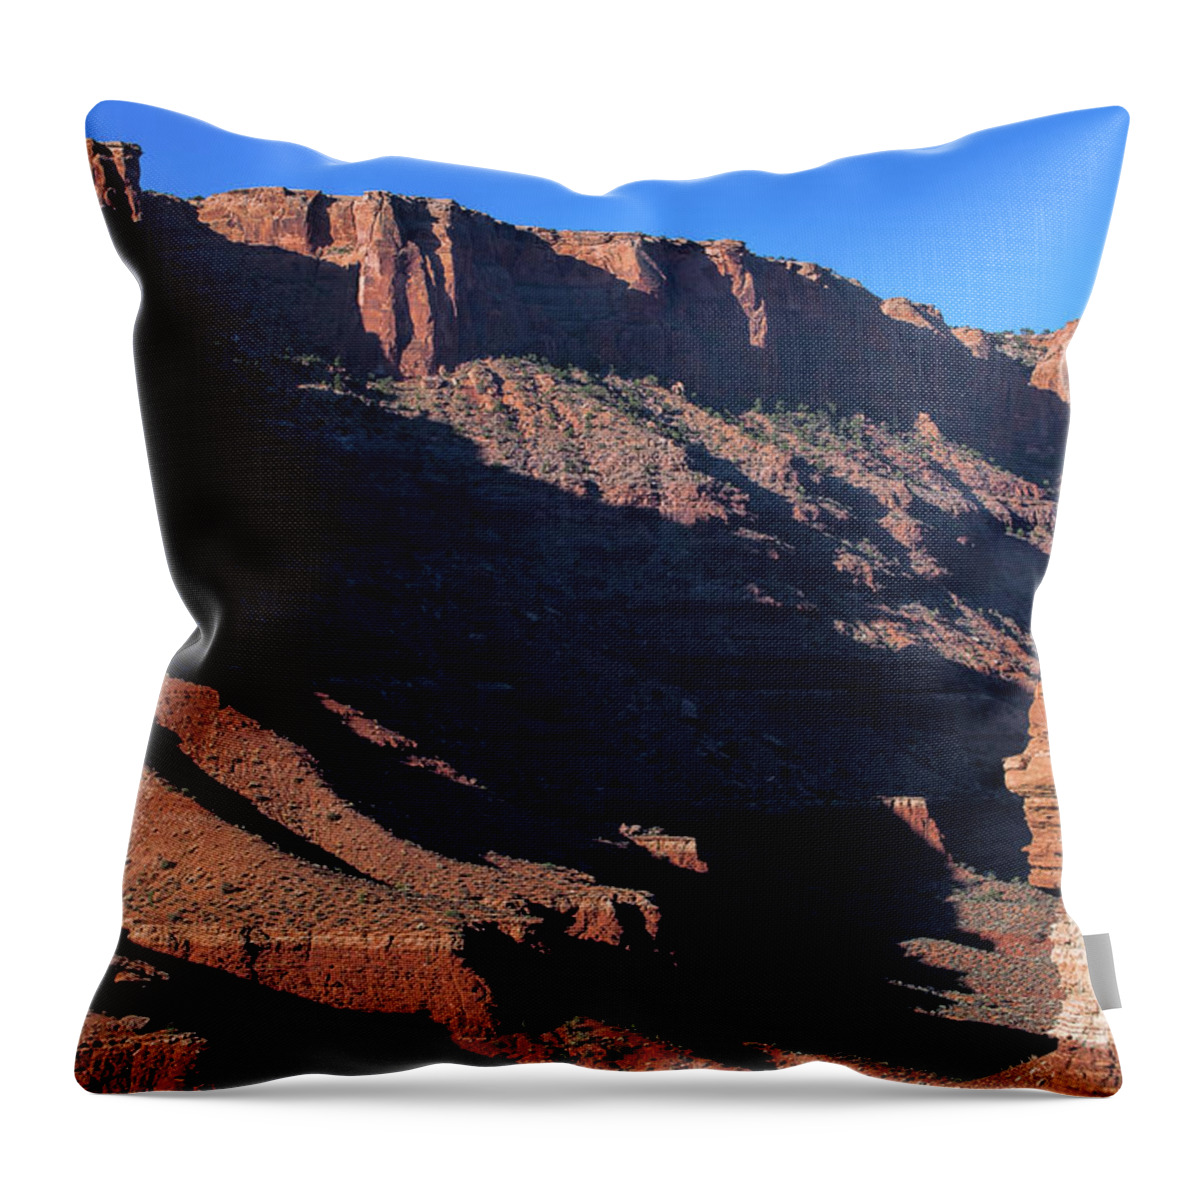 Canyonlands Landscape Throw Pillow featuring the photograph Rock Sentry by Jim Garrison